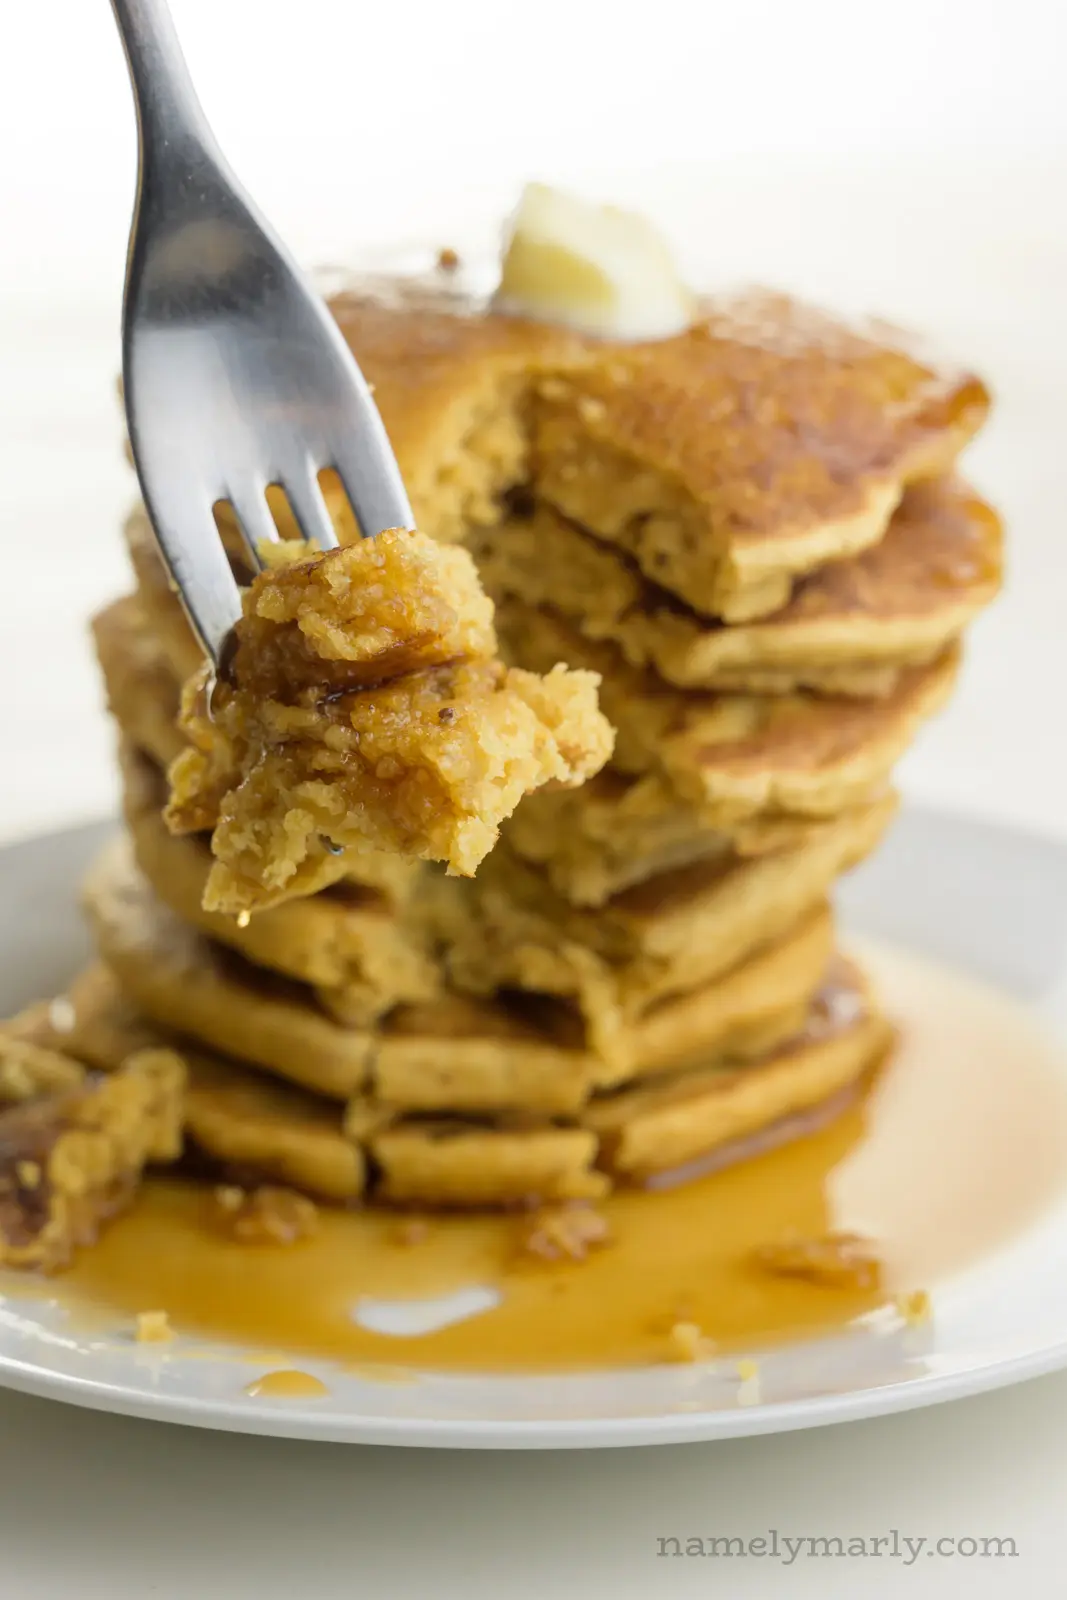 A fork holds a bite of pancakes in front of the rest of the plateful.